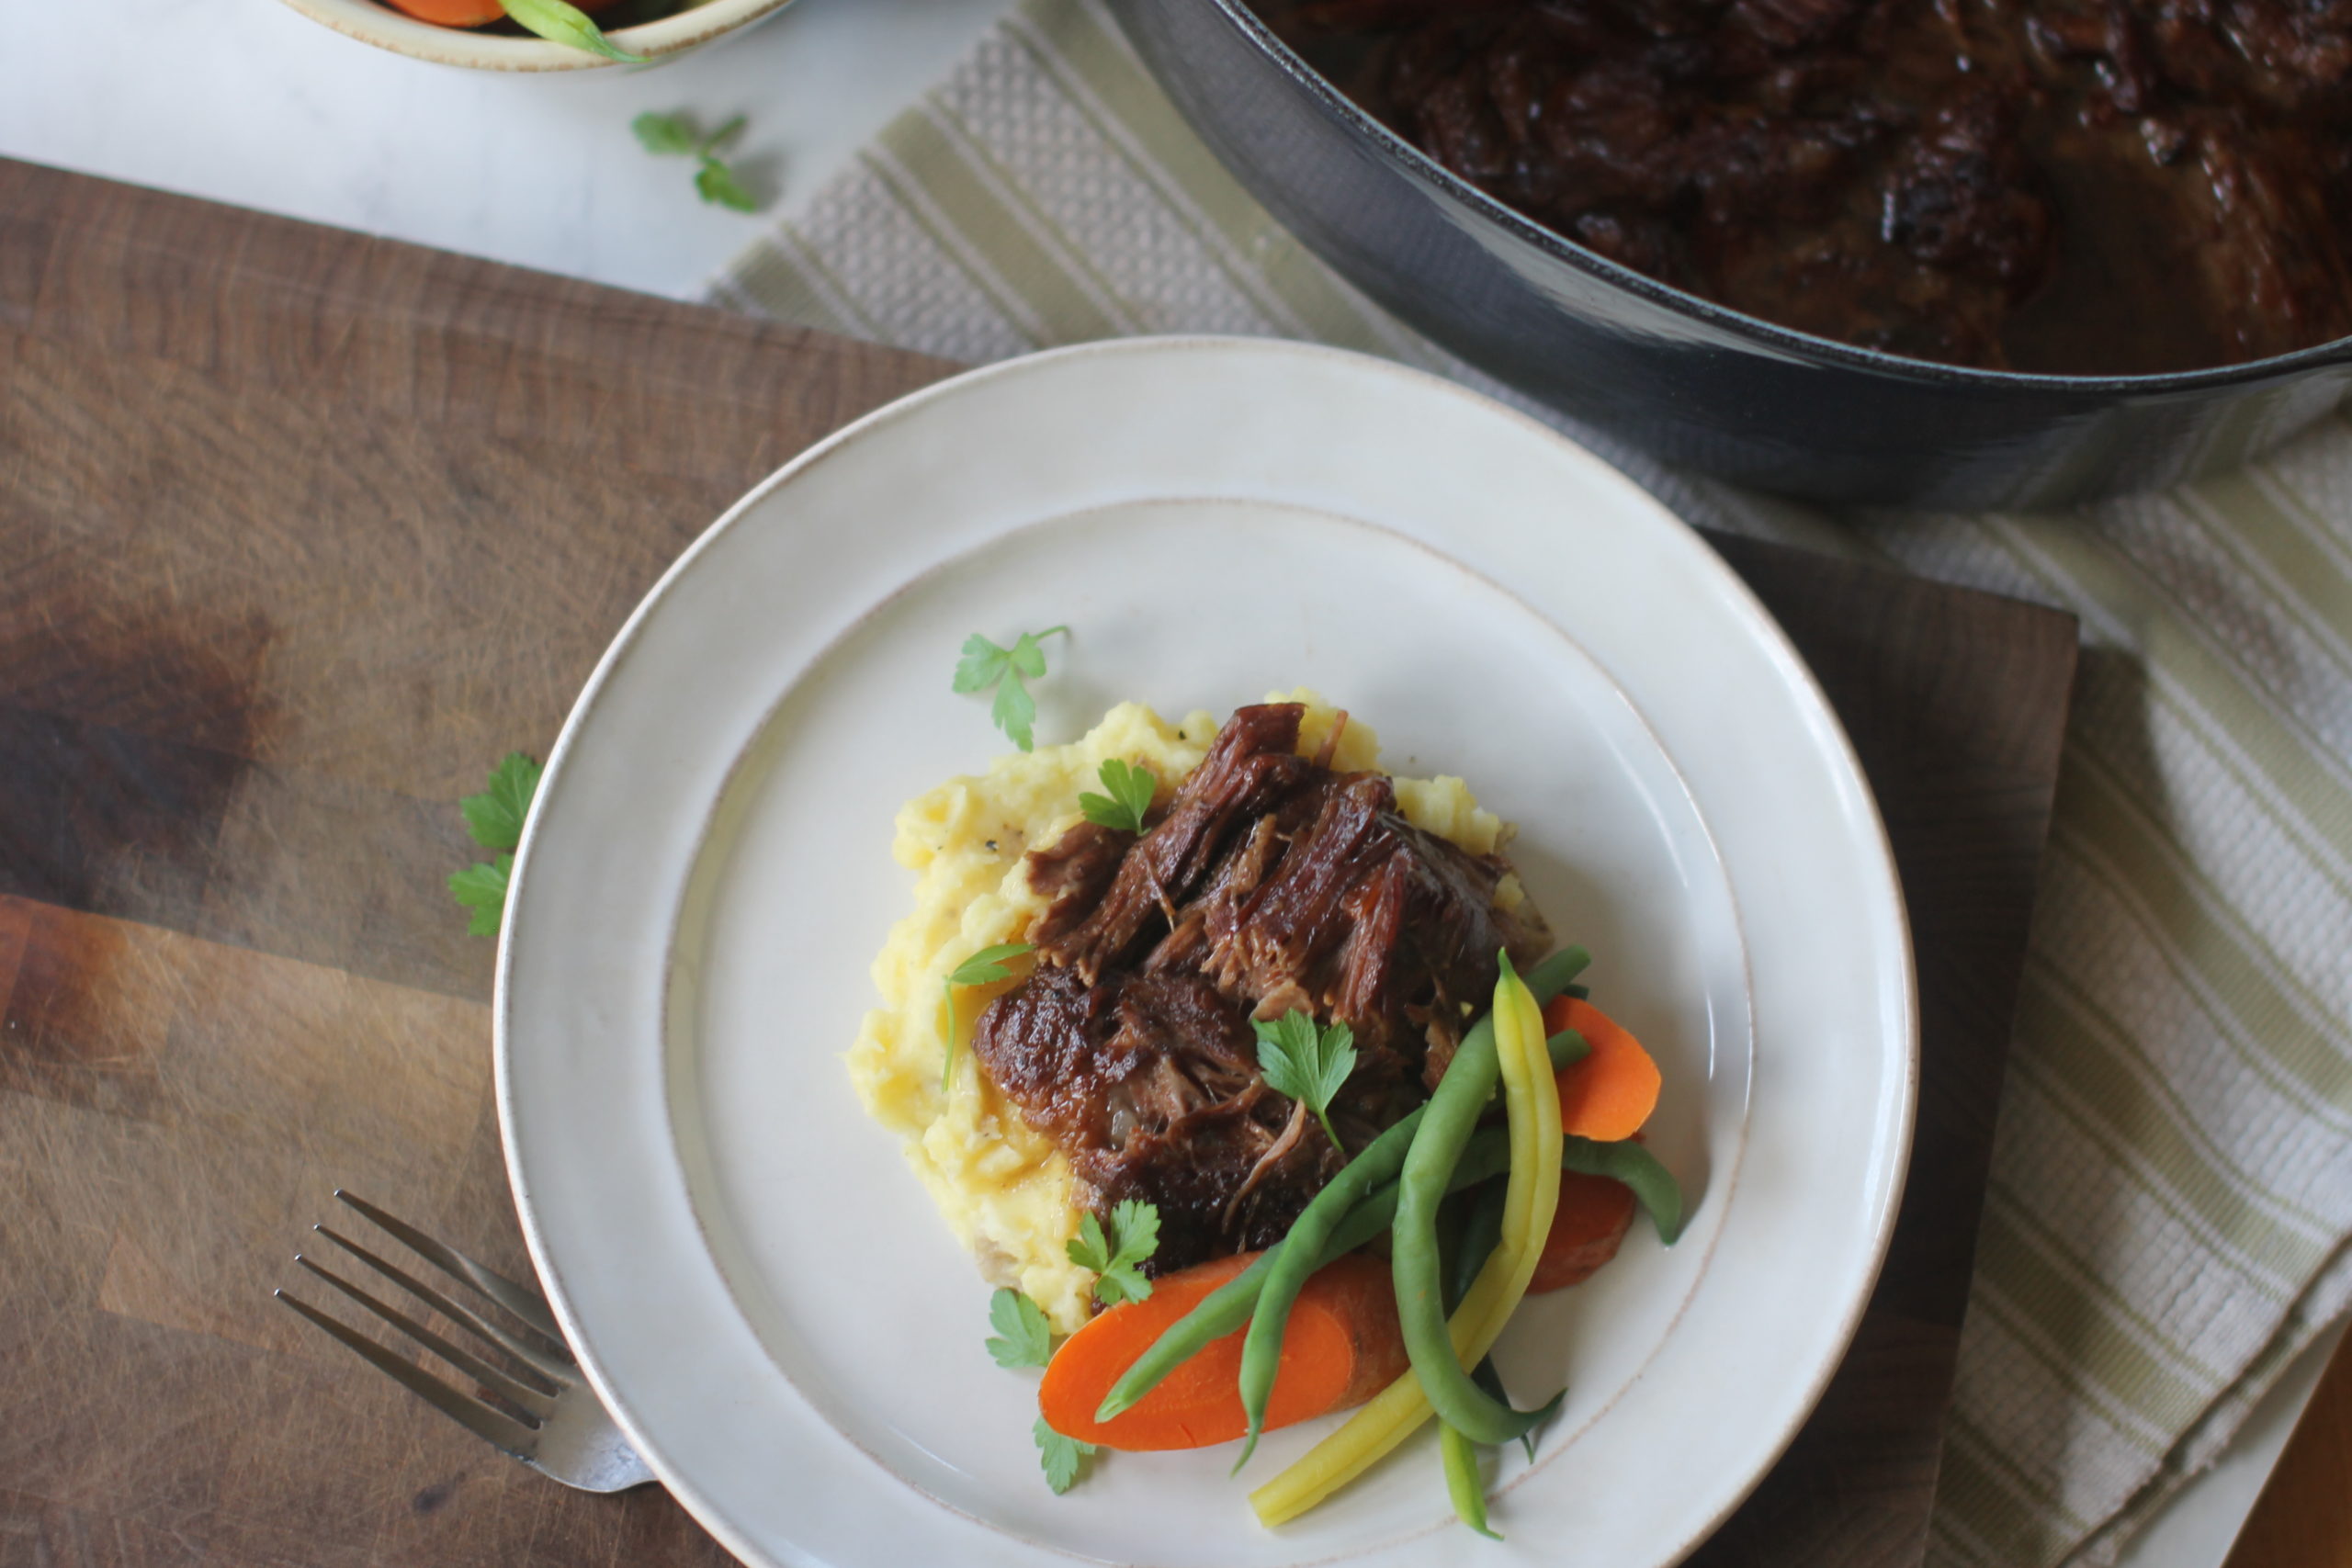 Simply Perfect Beef Roast with Mashed Potatoes, Carrots and Green Beans